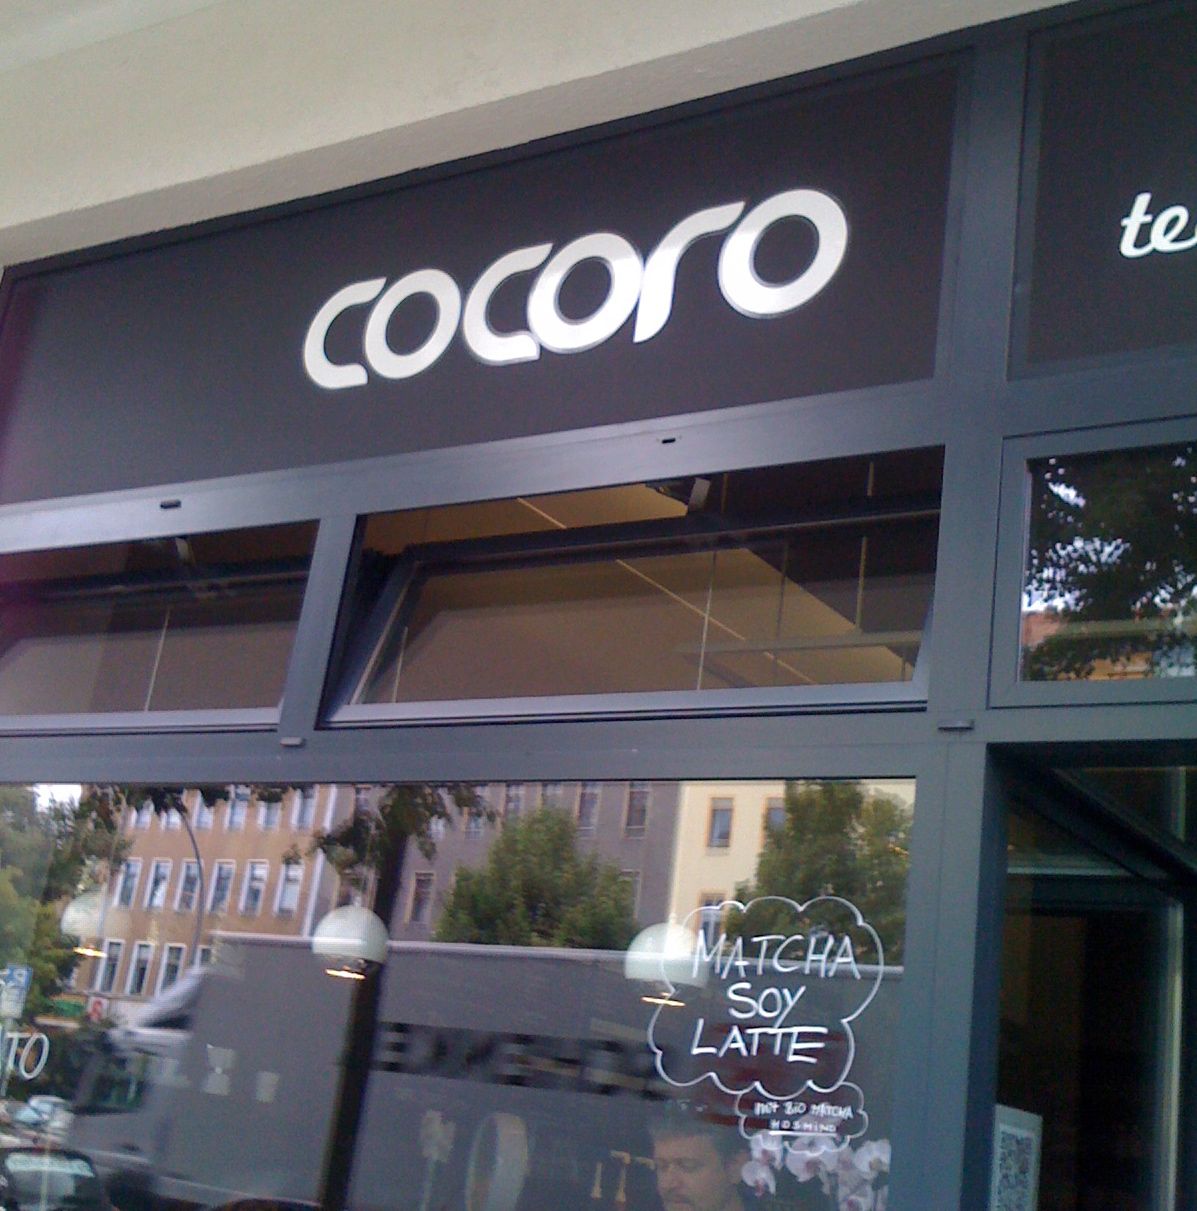 You are currently viewing <!--:en-->‘Cocoro’ The New Teahouse Cafe  in Berlin’s Kreuzberg District<!--:-->